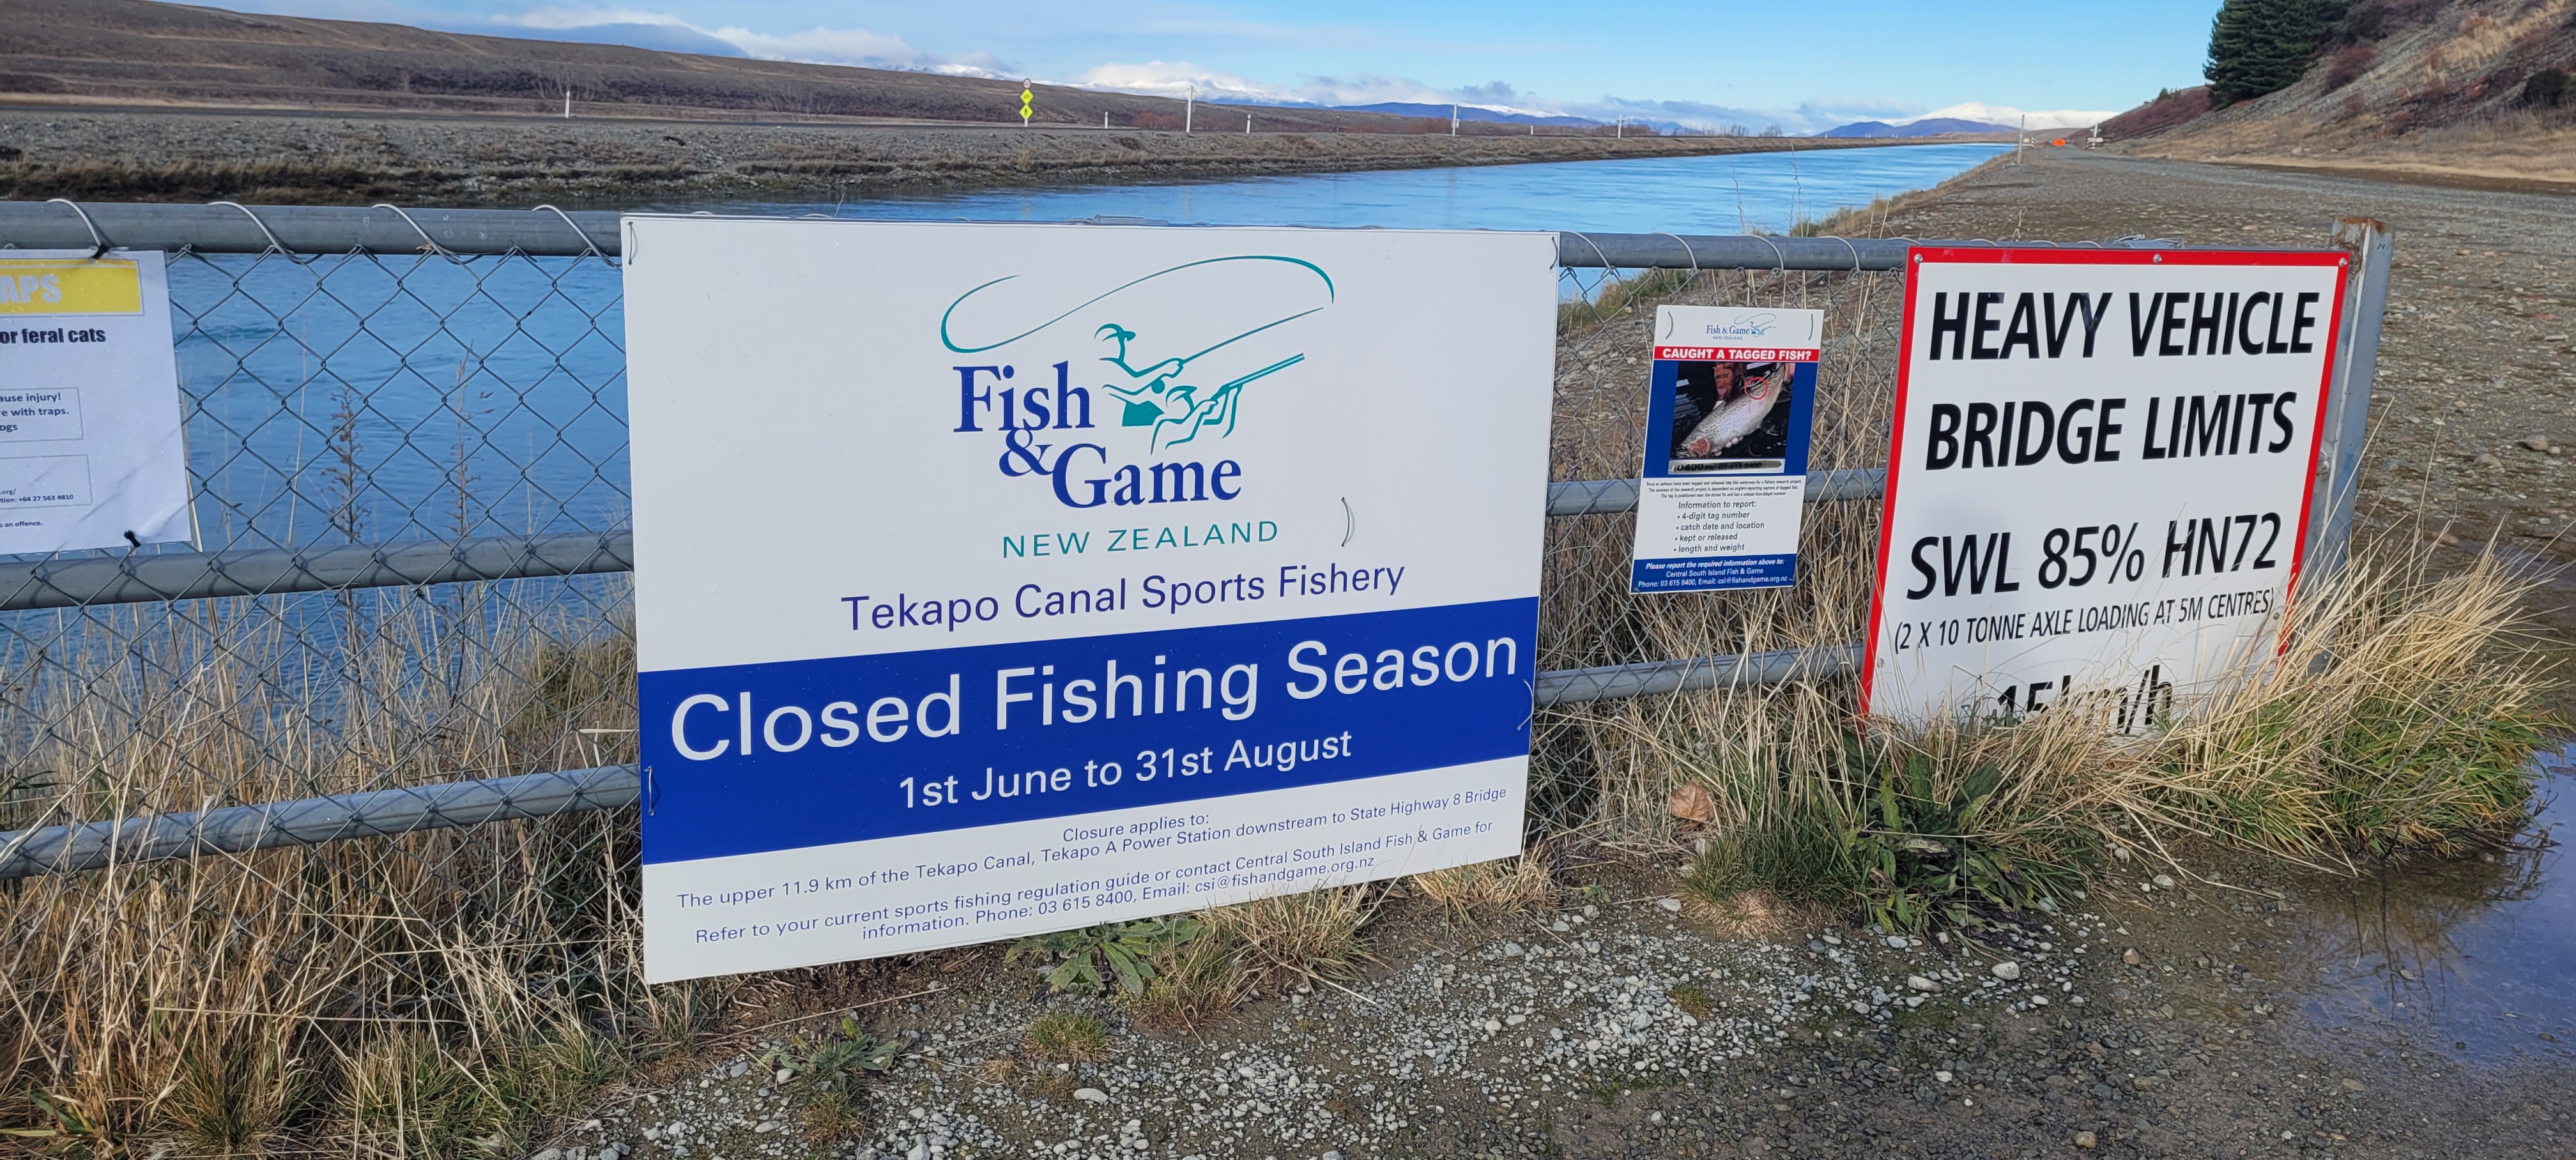 WFRcsi4 closure signage in place at the upper Tekapo Canal